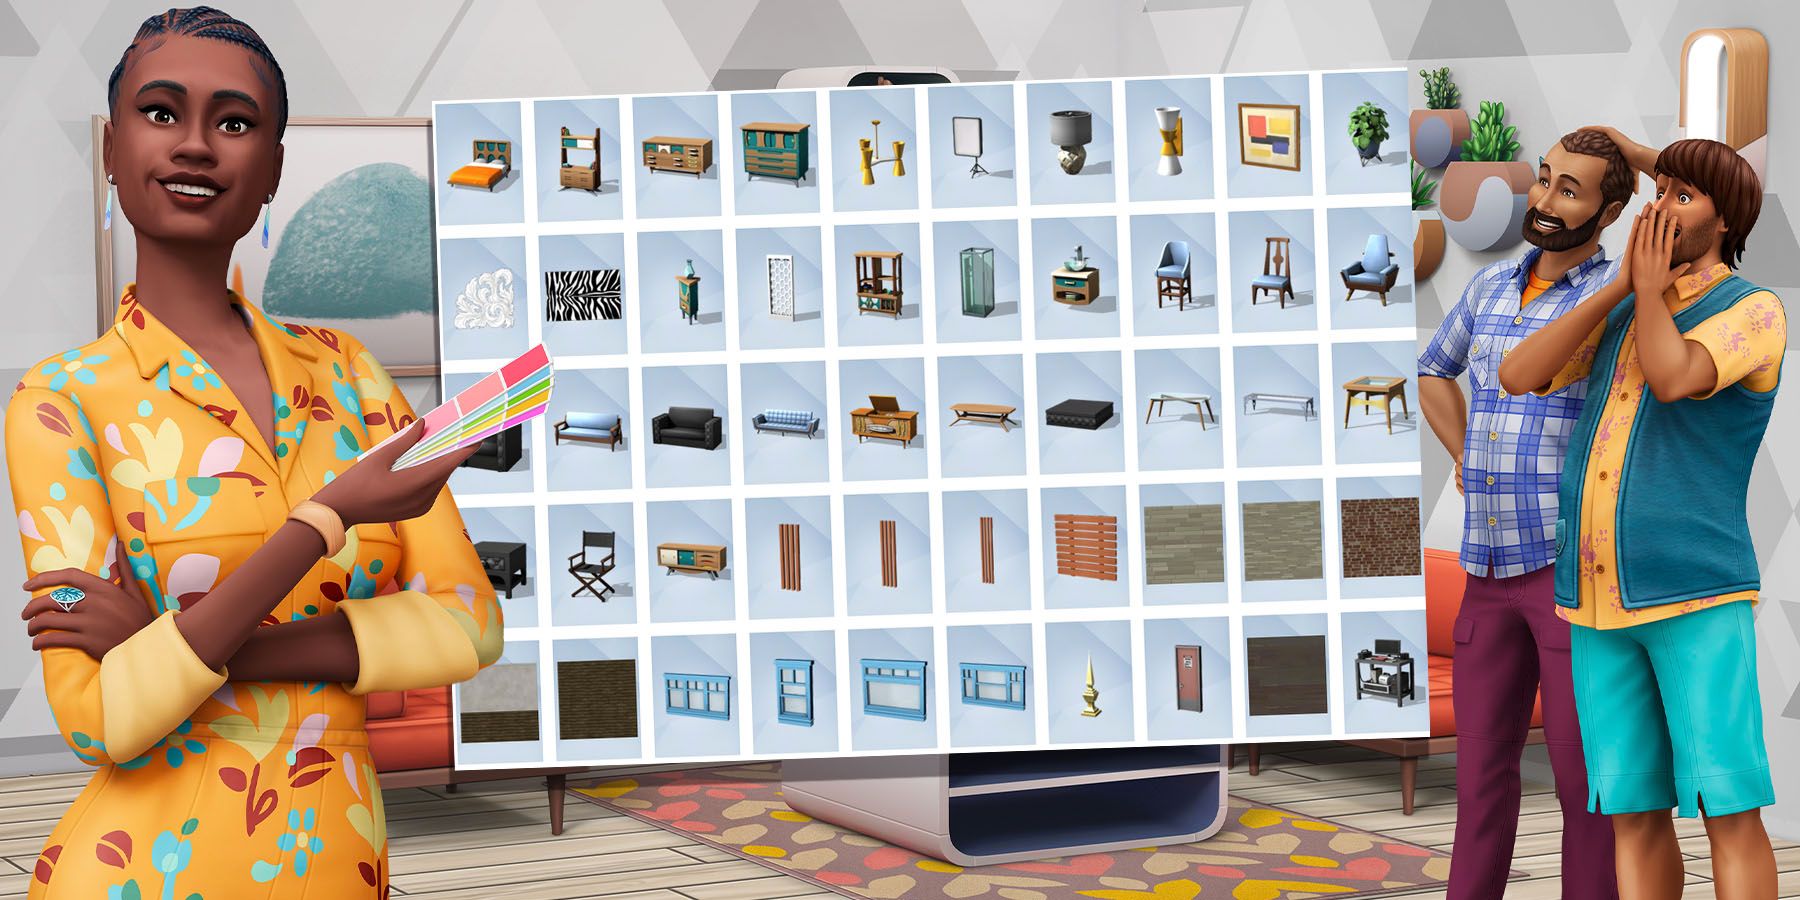 The Sims 4 Cheat: Unlock All Career Locked Items in Build Mode